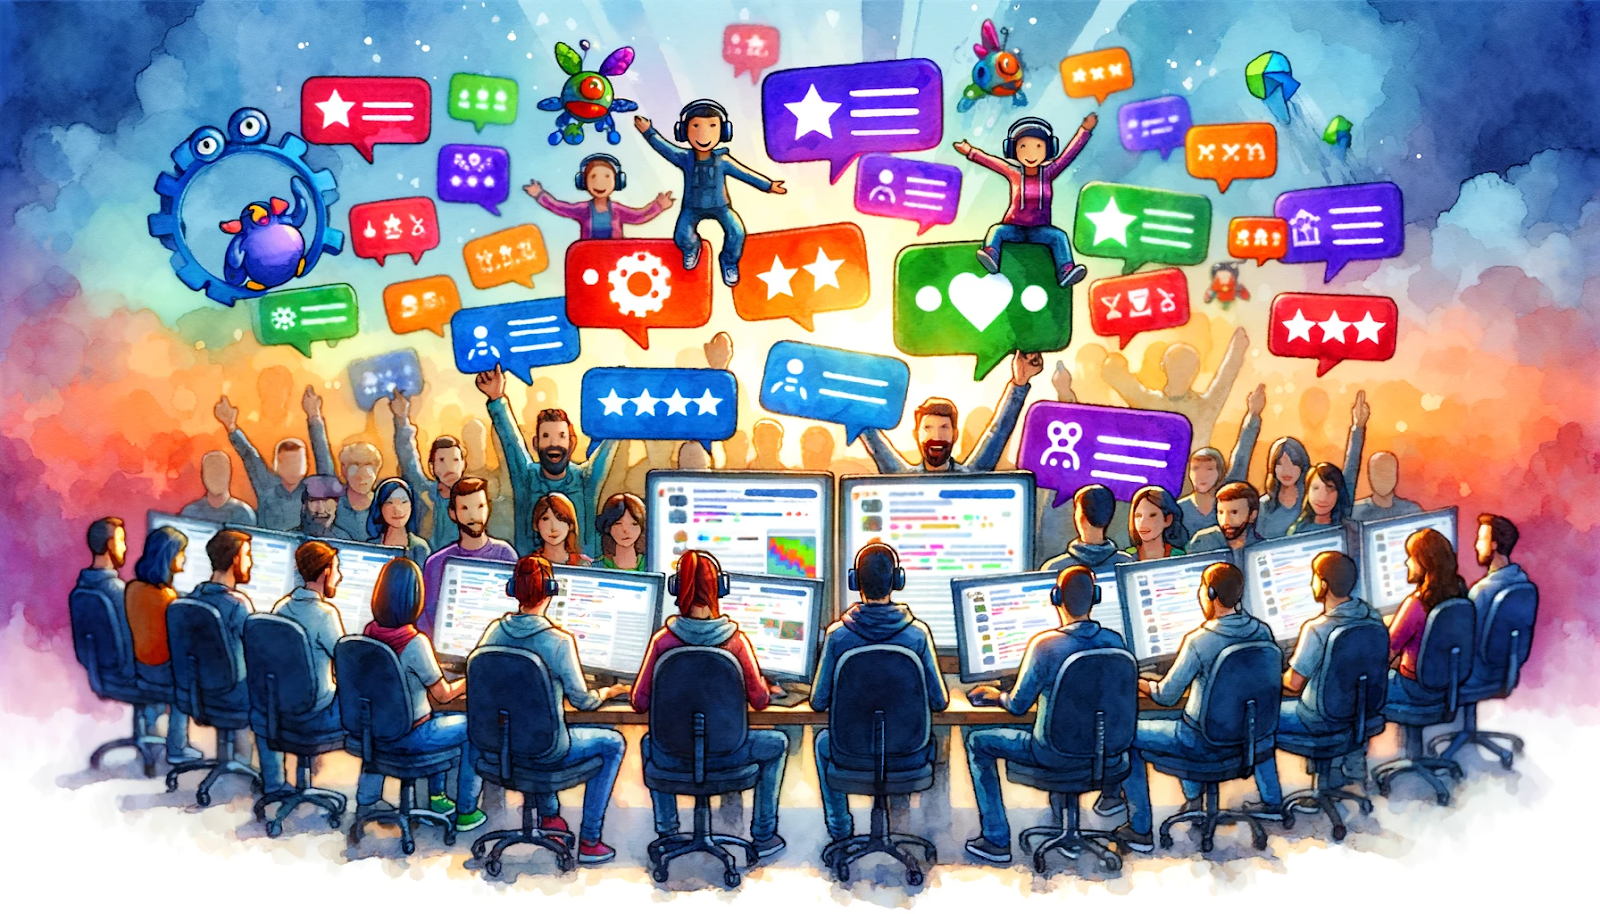 game developers reviewing feedback from a vibrant online community. It features a team of developers at their computers, engaging with colorful avatars representing community members.